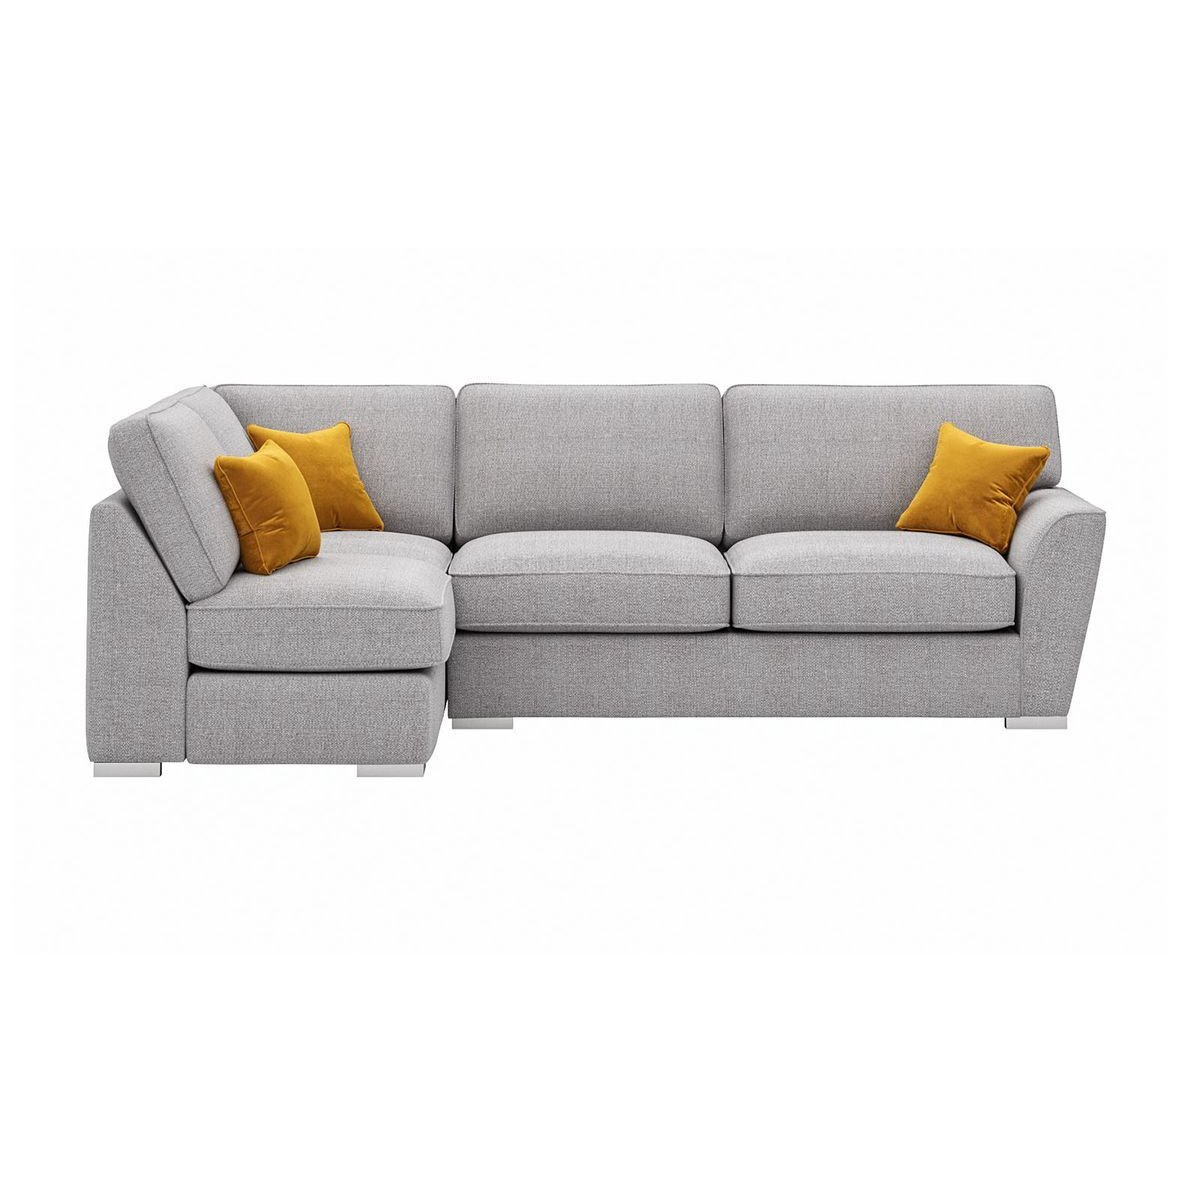 Majestic New Left Hand Corner Sofa with Fitted Back Cushions, light grey/mustard - image 1